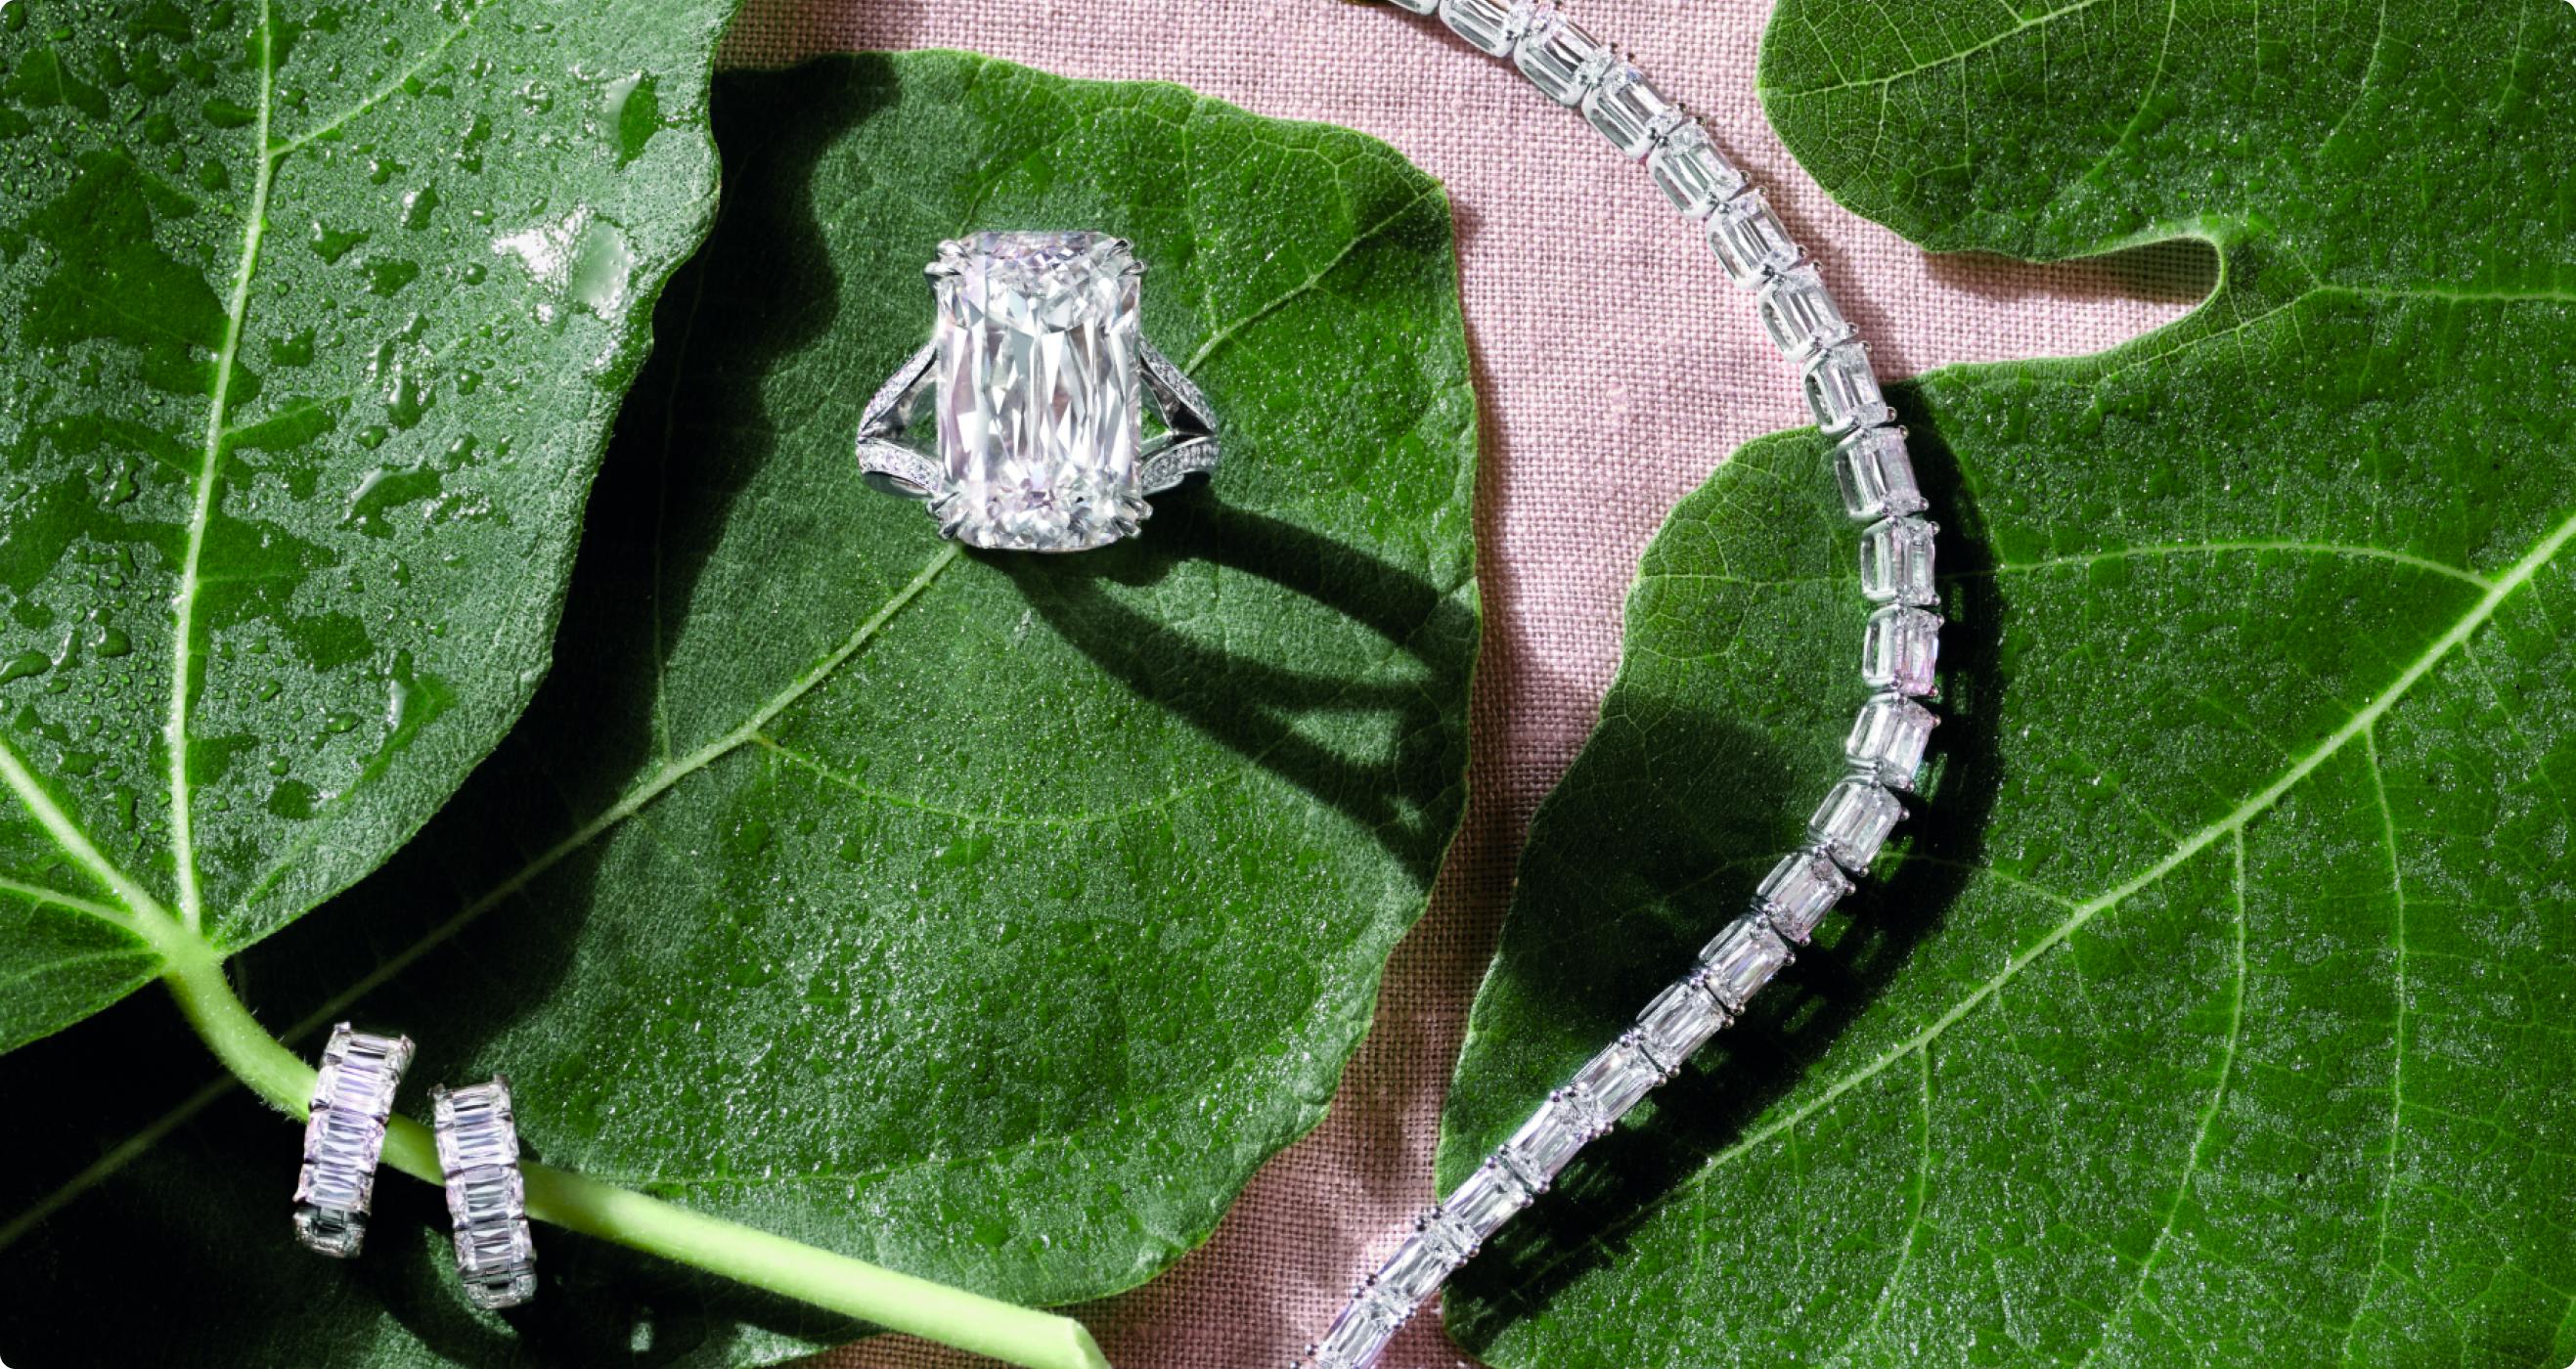 A luxurious engagement ring with a large emerald-cut diamond set on a silver band, alongside a diamond bracelet, both resting on dew-covered green leaves.